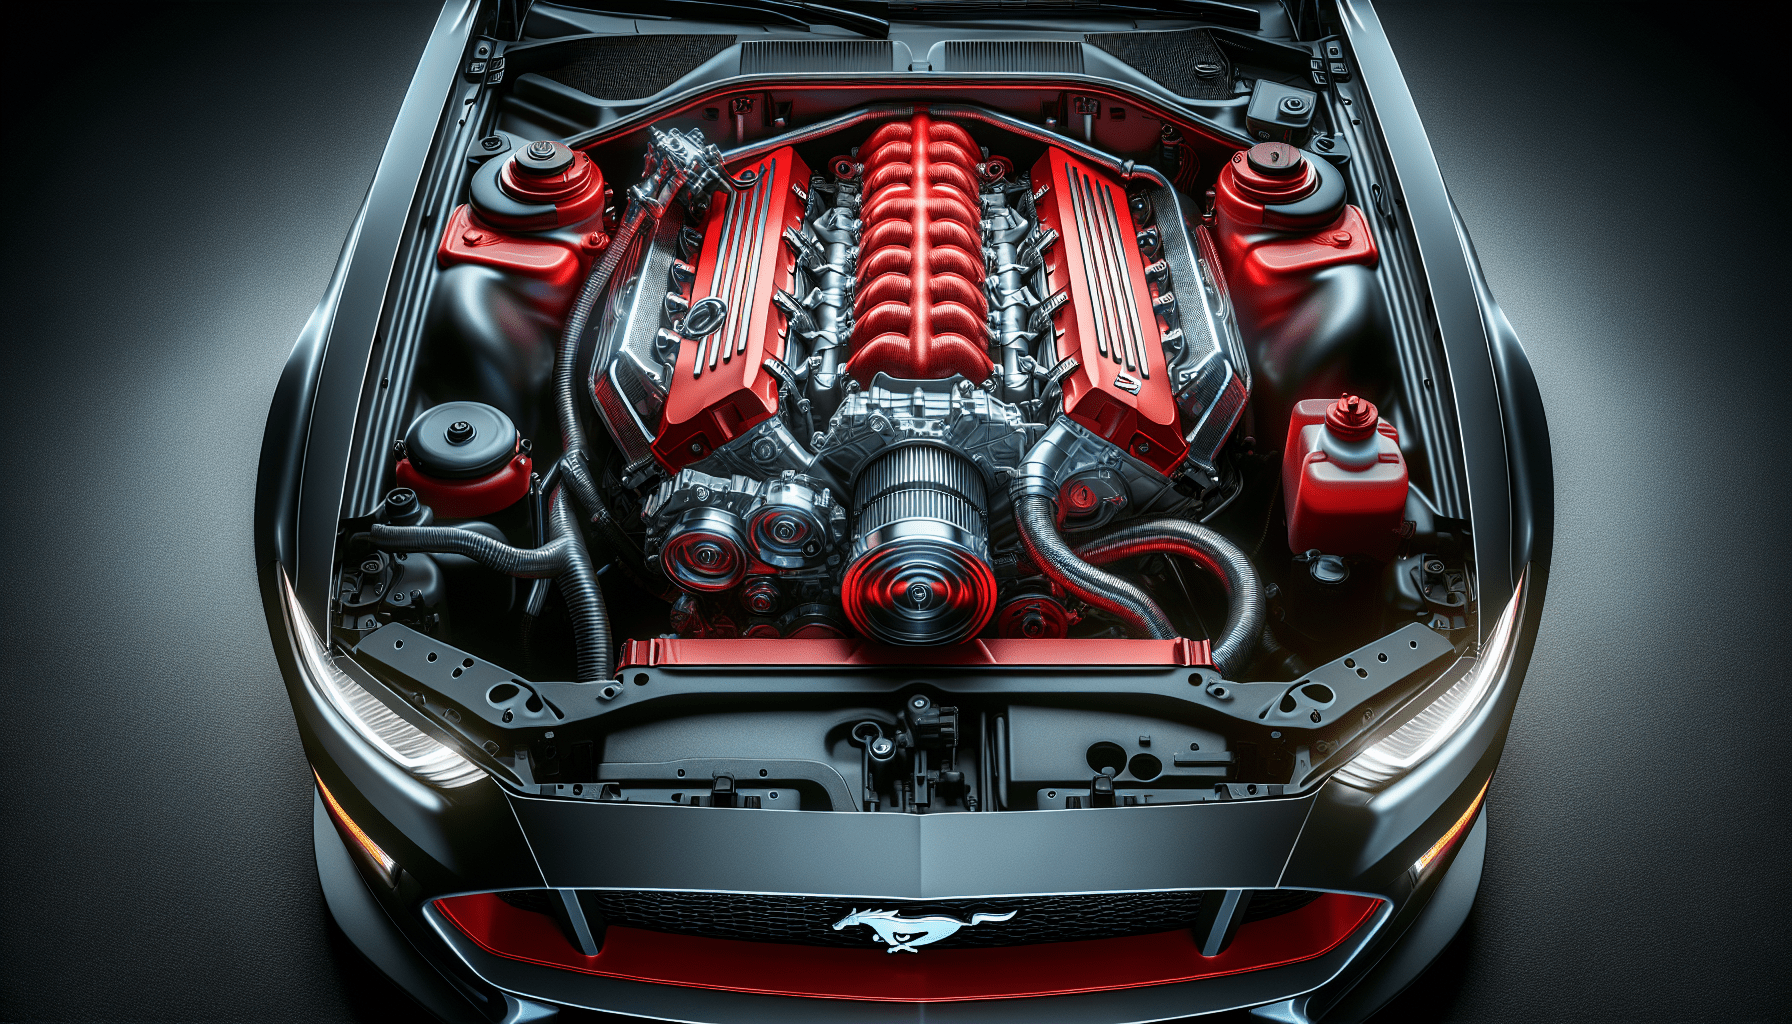 How Much Horsepower Does A 5.0 V8 Have?